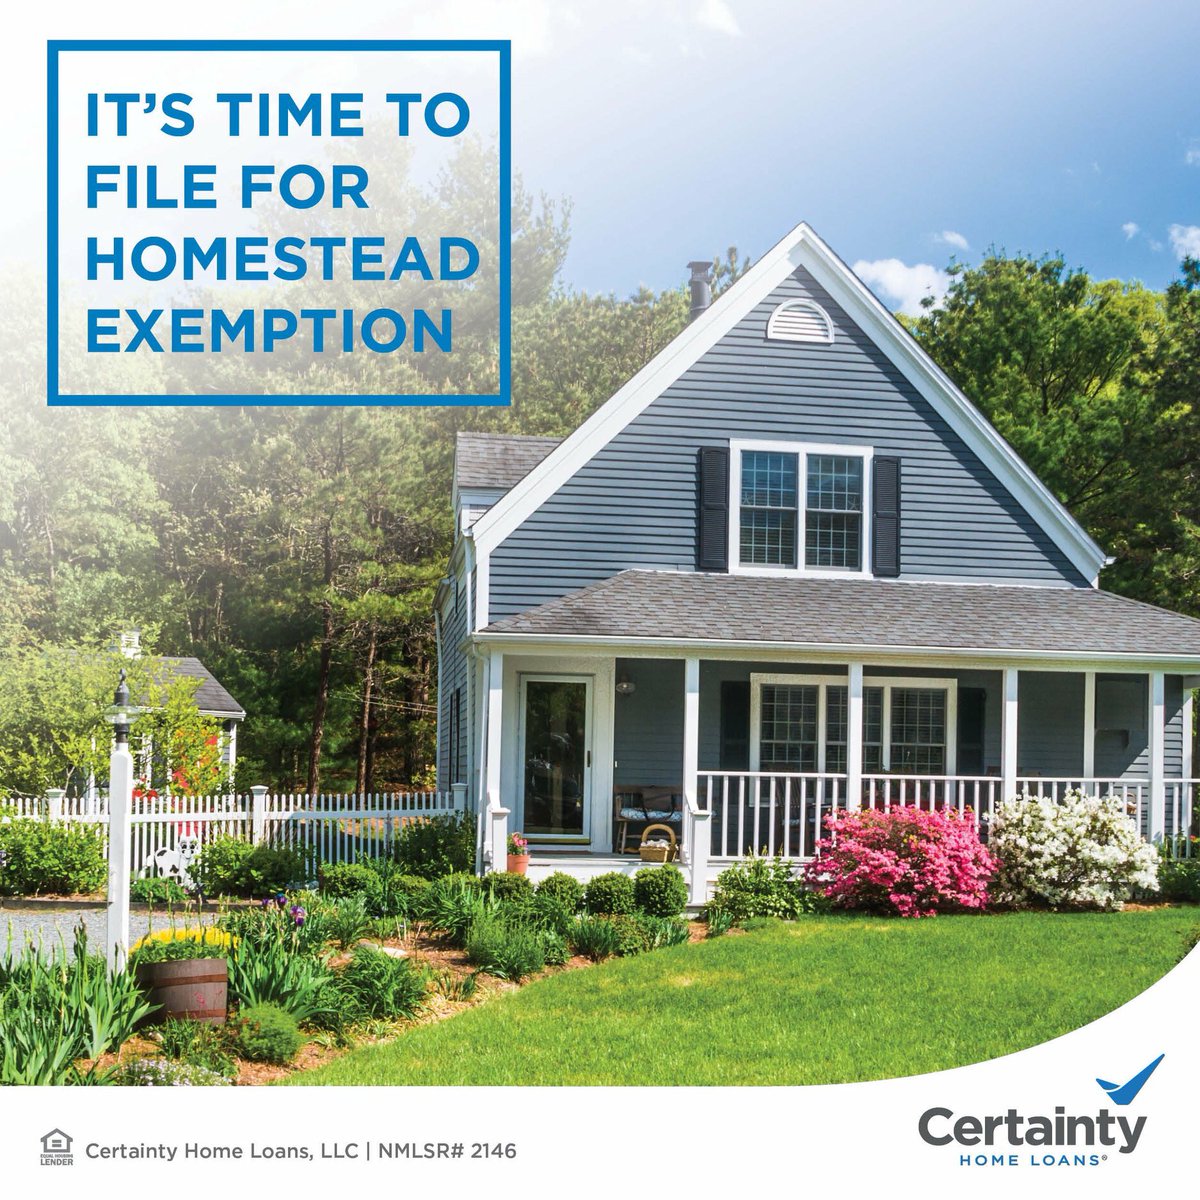 Homestead Exemption Deadline – Don’t Miss your chance to save Money!

If you purchased a property and occupied it by January 1, 2018,  don't forget to file for your homestead exemption! 
Contact your Loan Officer for more information.  #homesteadexemption #withCertainty